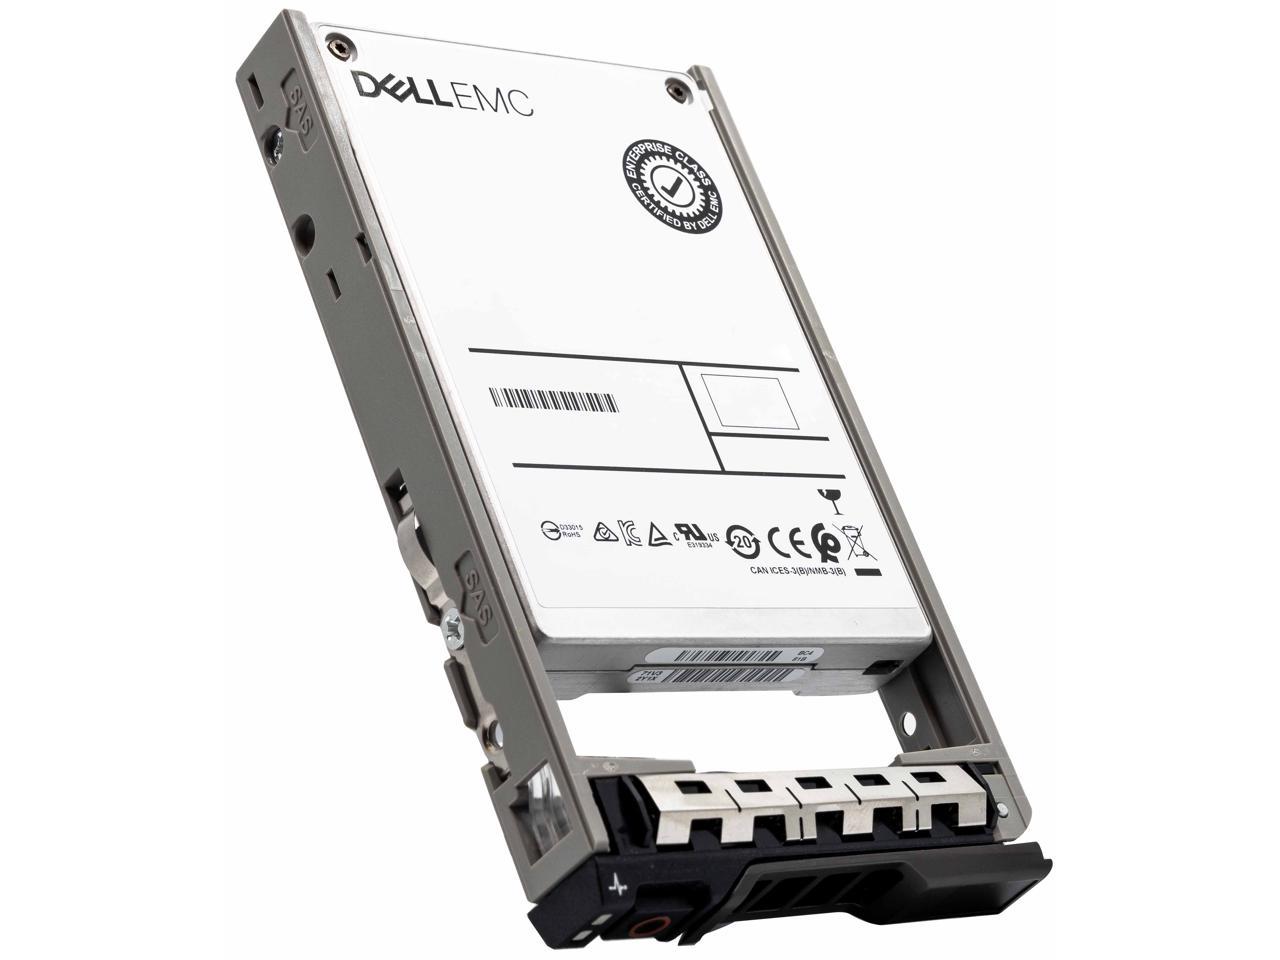 Dell G13 0CW988 800GB SAS 12Gb/s 2.5" Manufacturer Recertified SSD